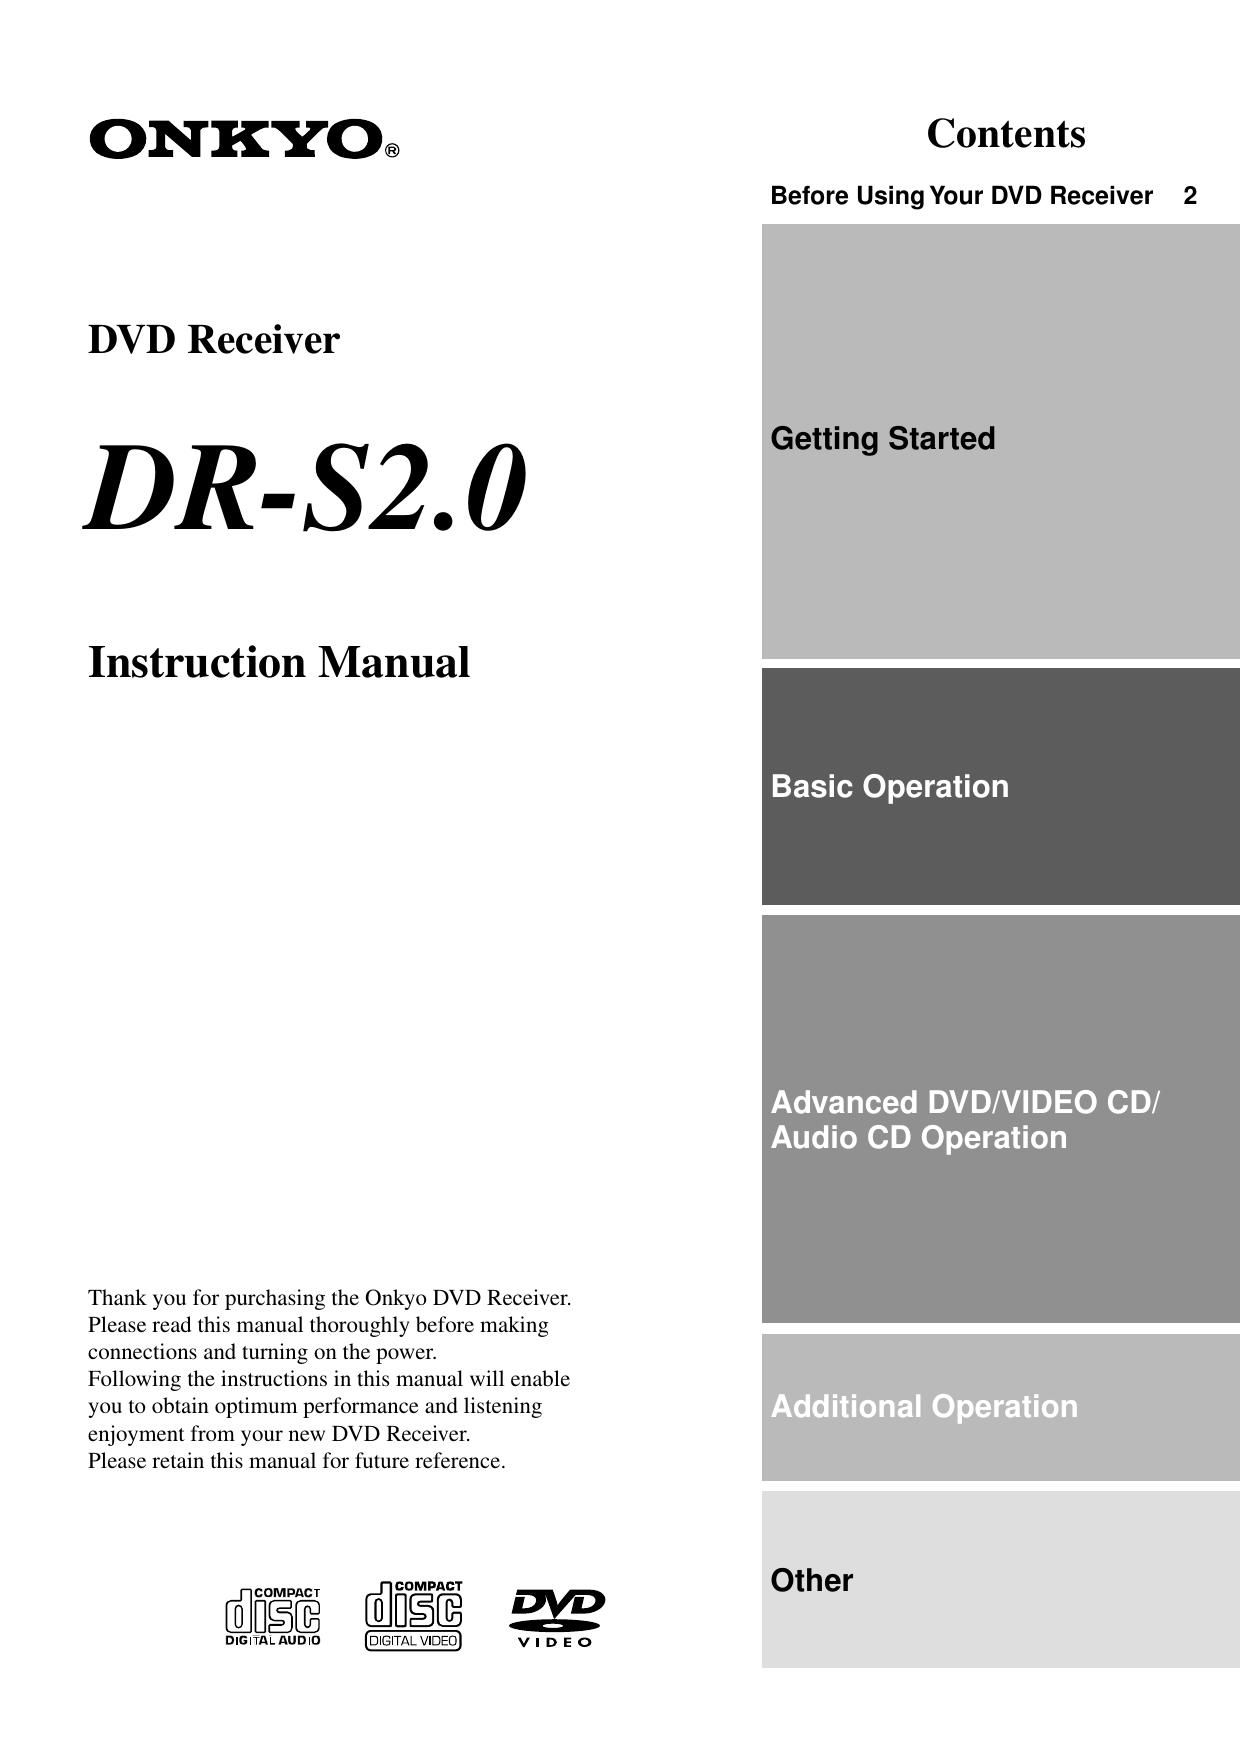 Onkyo DRS 2.0 Owners Manual